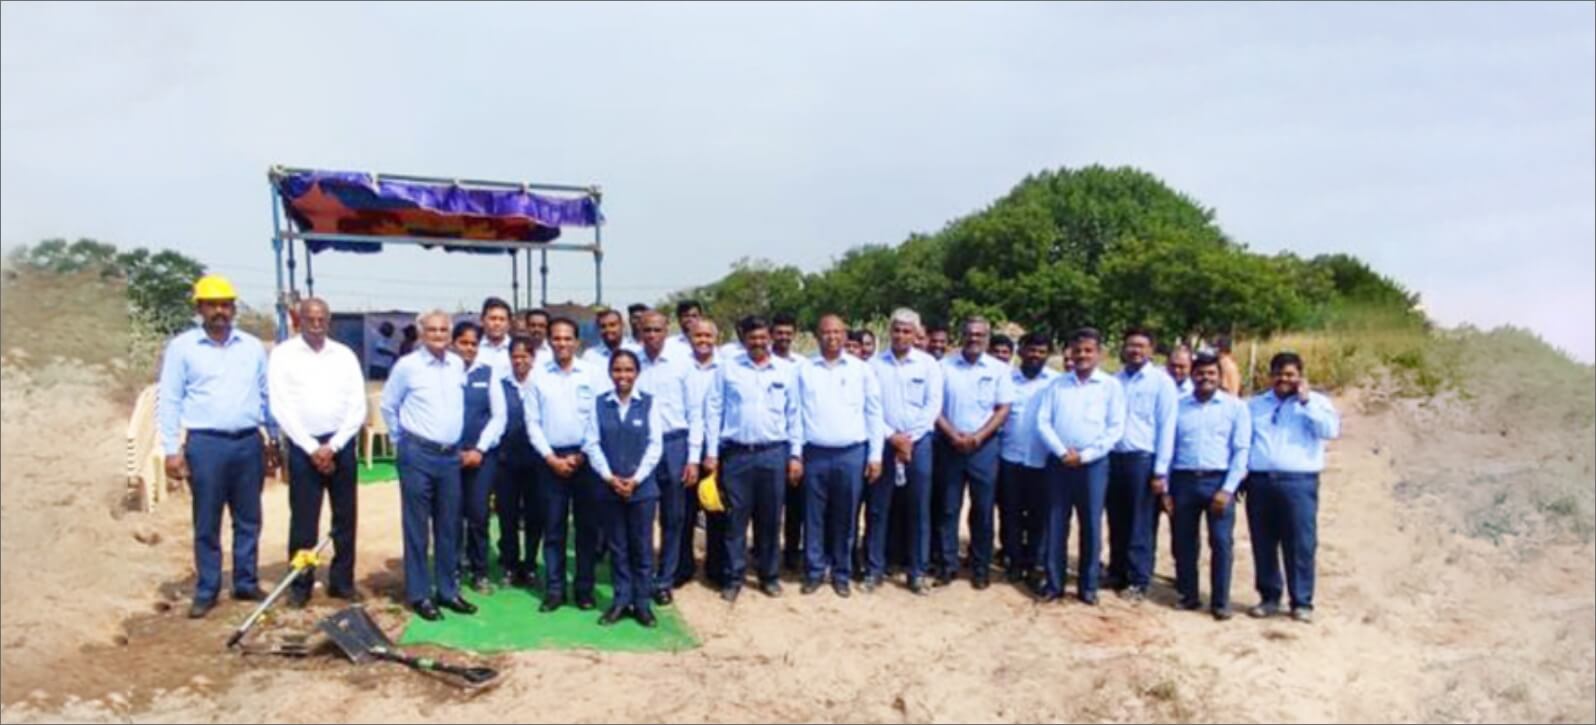 Ground-breaking Cerermony of Desalination Plant at Spic